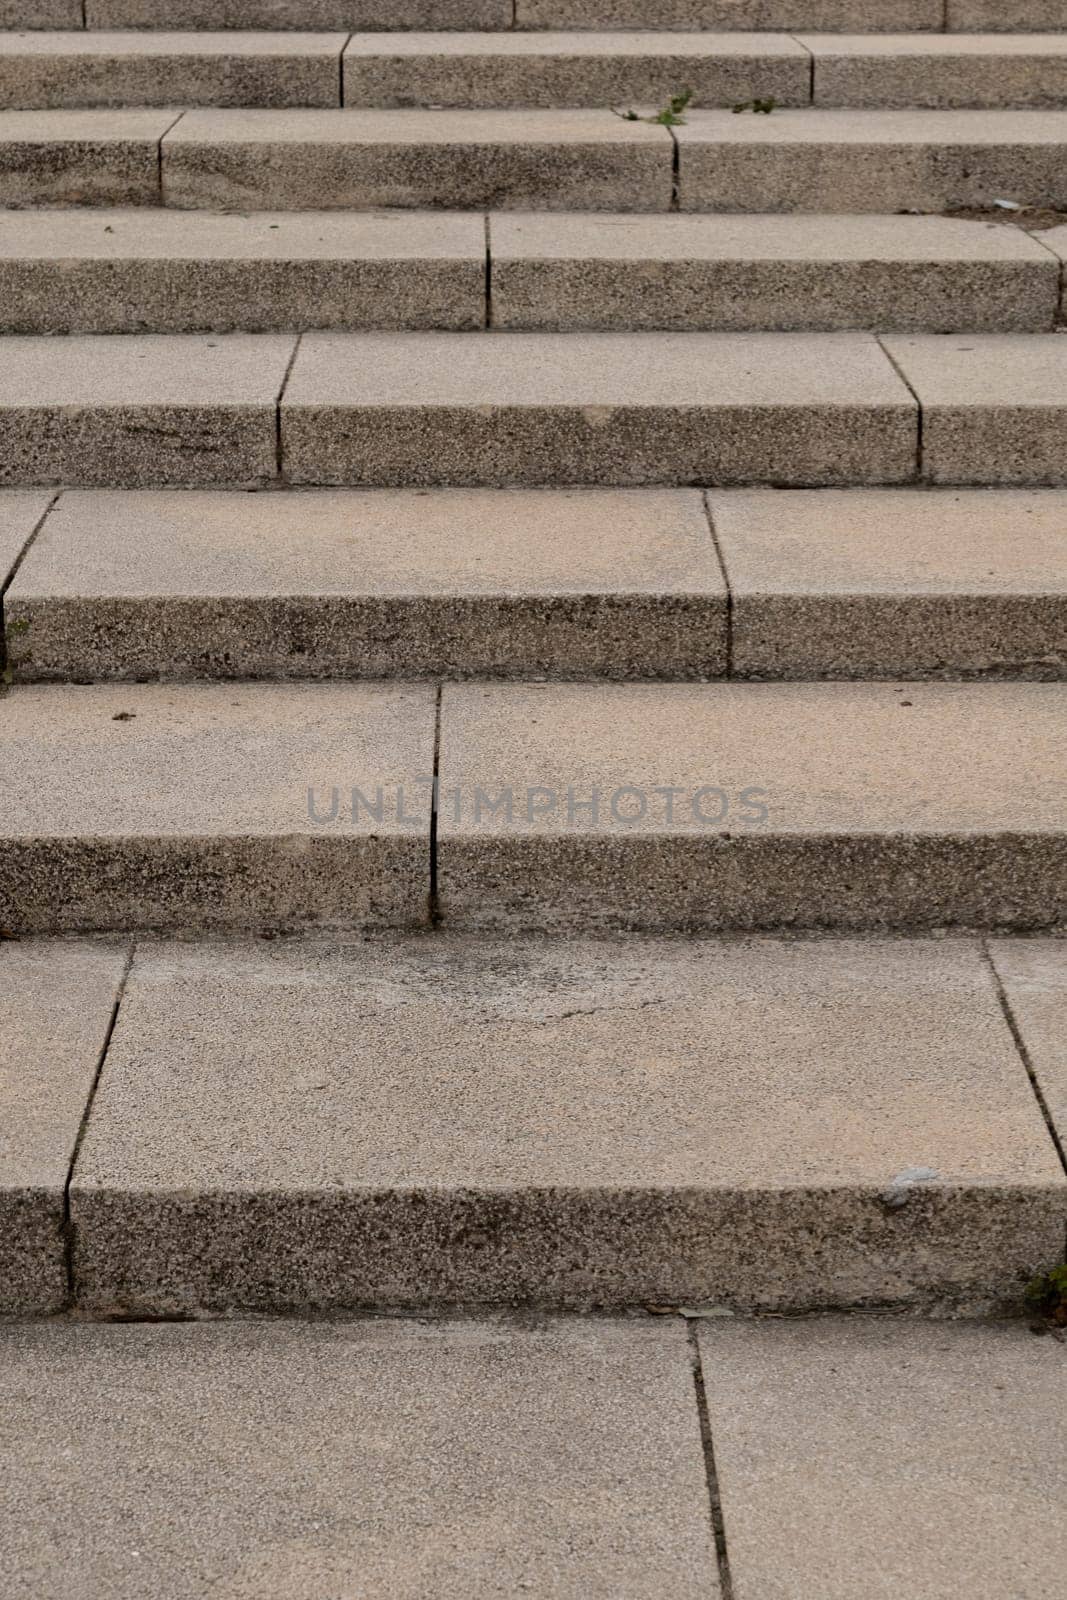 A detailed view of a rectangular set of stone stairs, showcasing the beige brickwork and the sturdy building material.